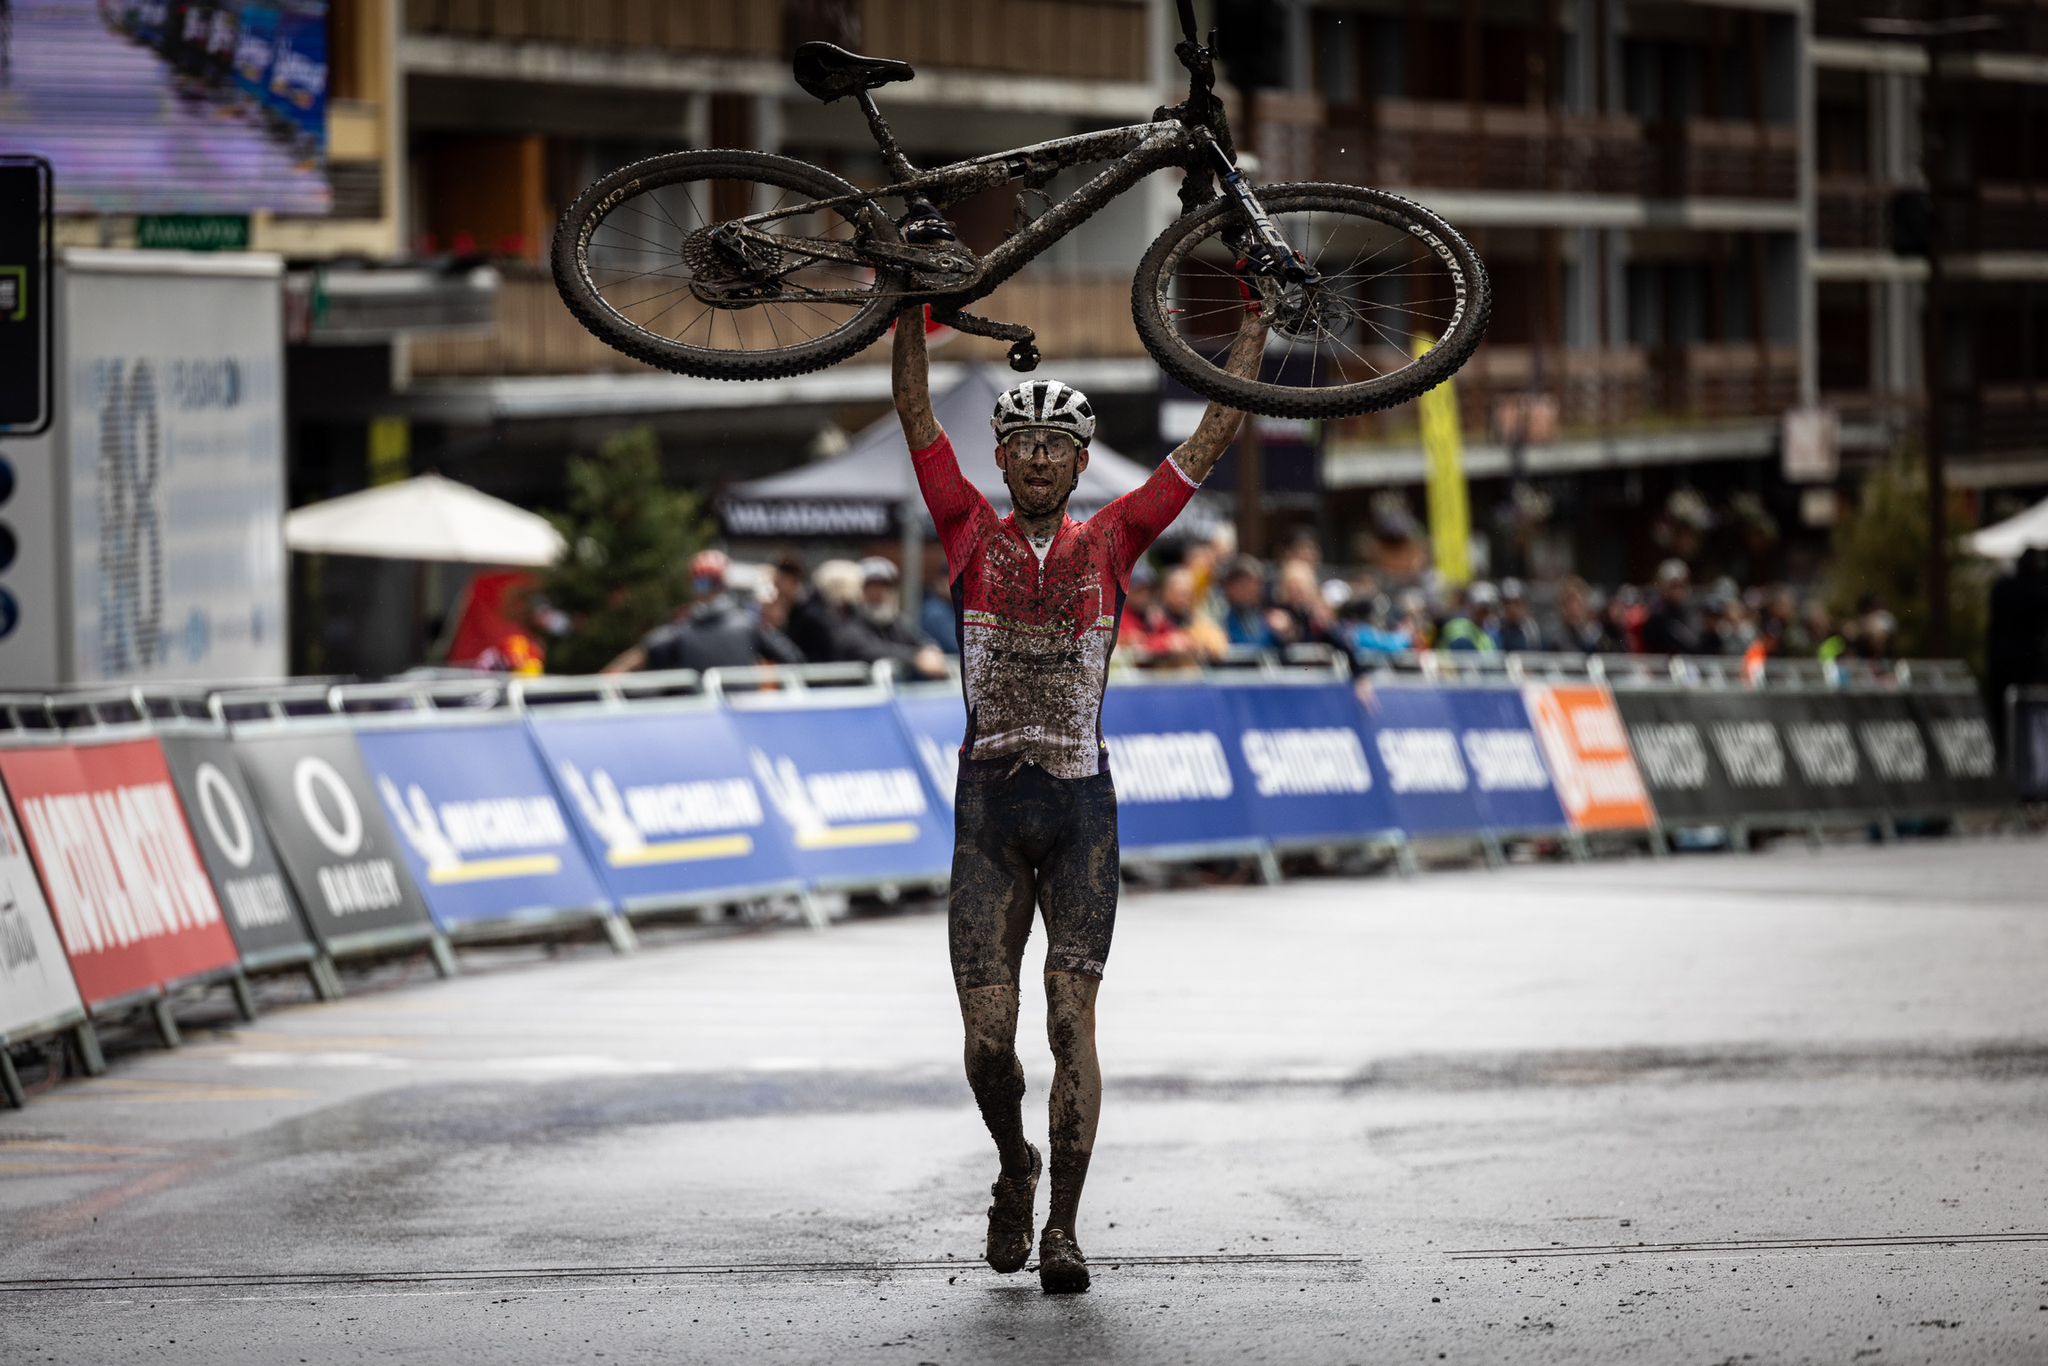 AMOS DOUBLES UP ON DEMANDING CRANS MONTANA UCI CROSS-COUNTRY OLYMPIC WORLD CUP COURSE